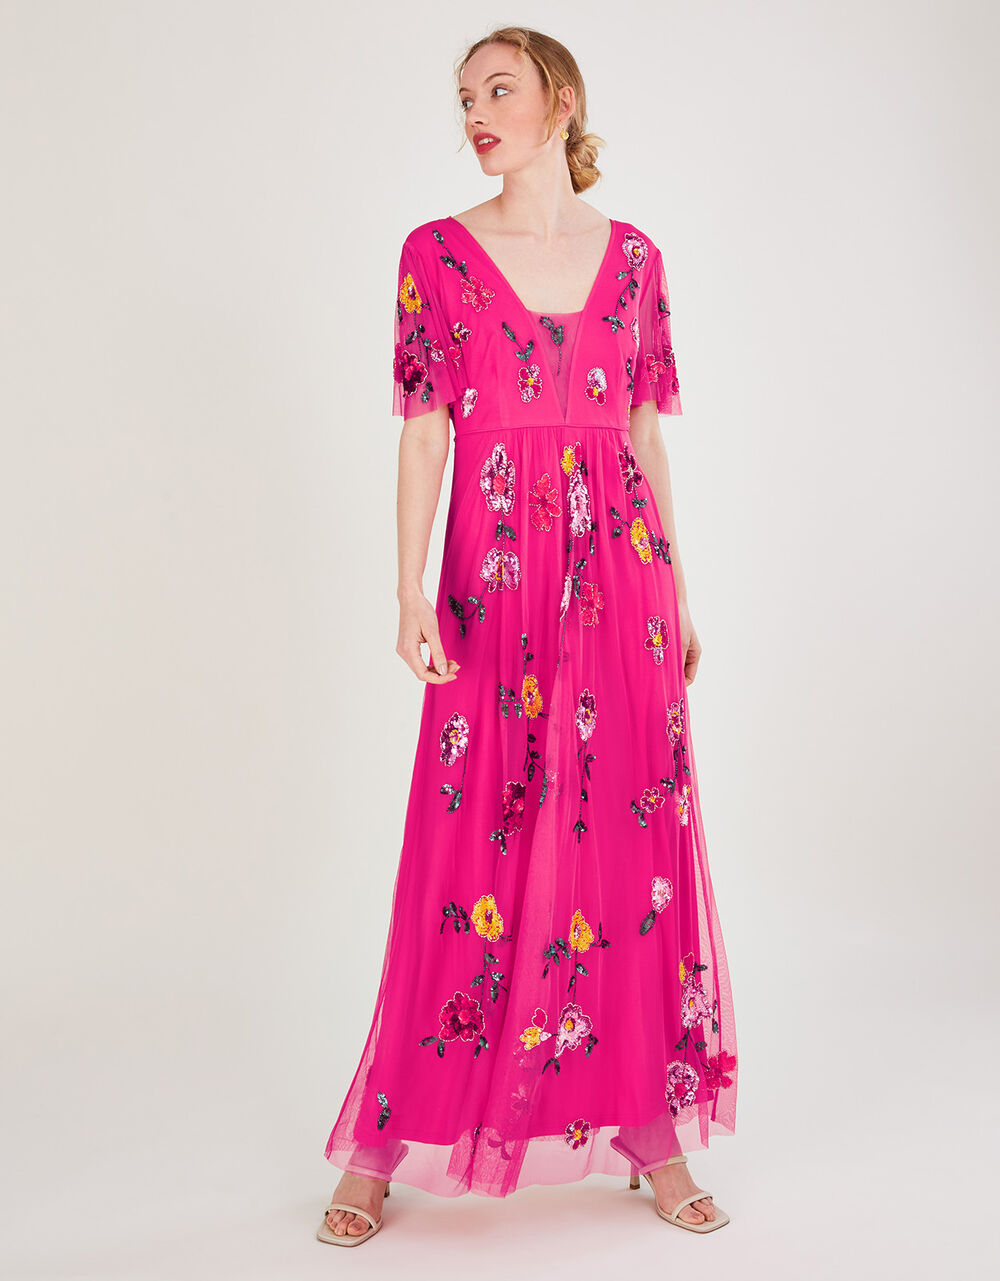 Women Dresses | Faye Embellished Maxi Dress in Recycled Polyester Pink - JK22705